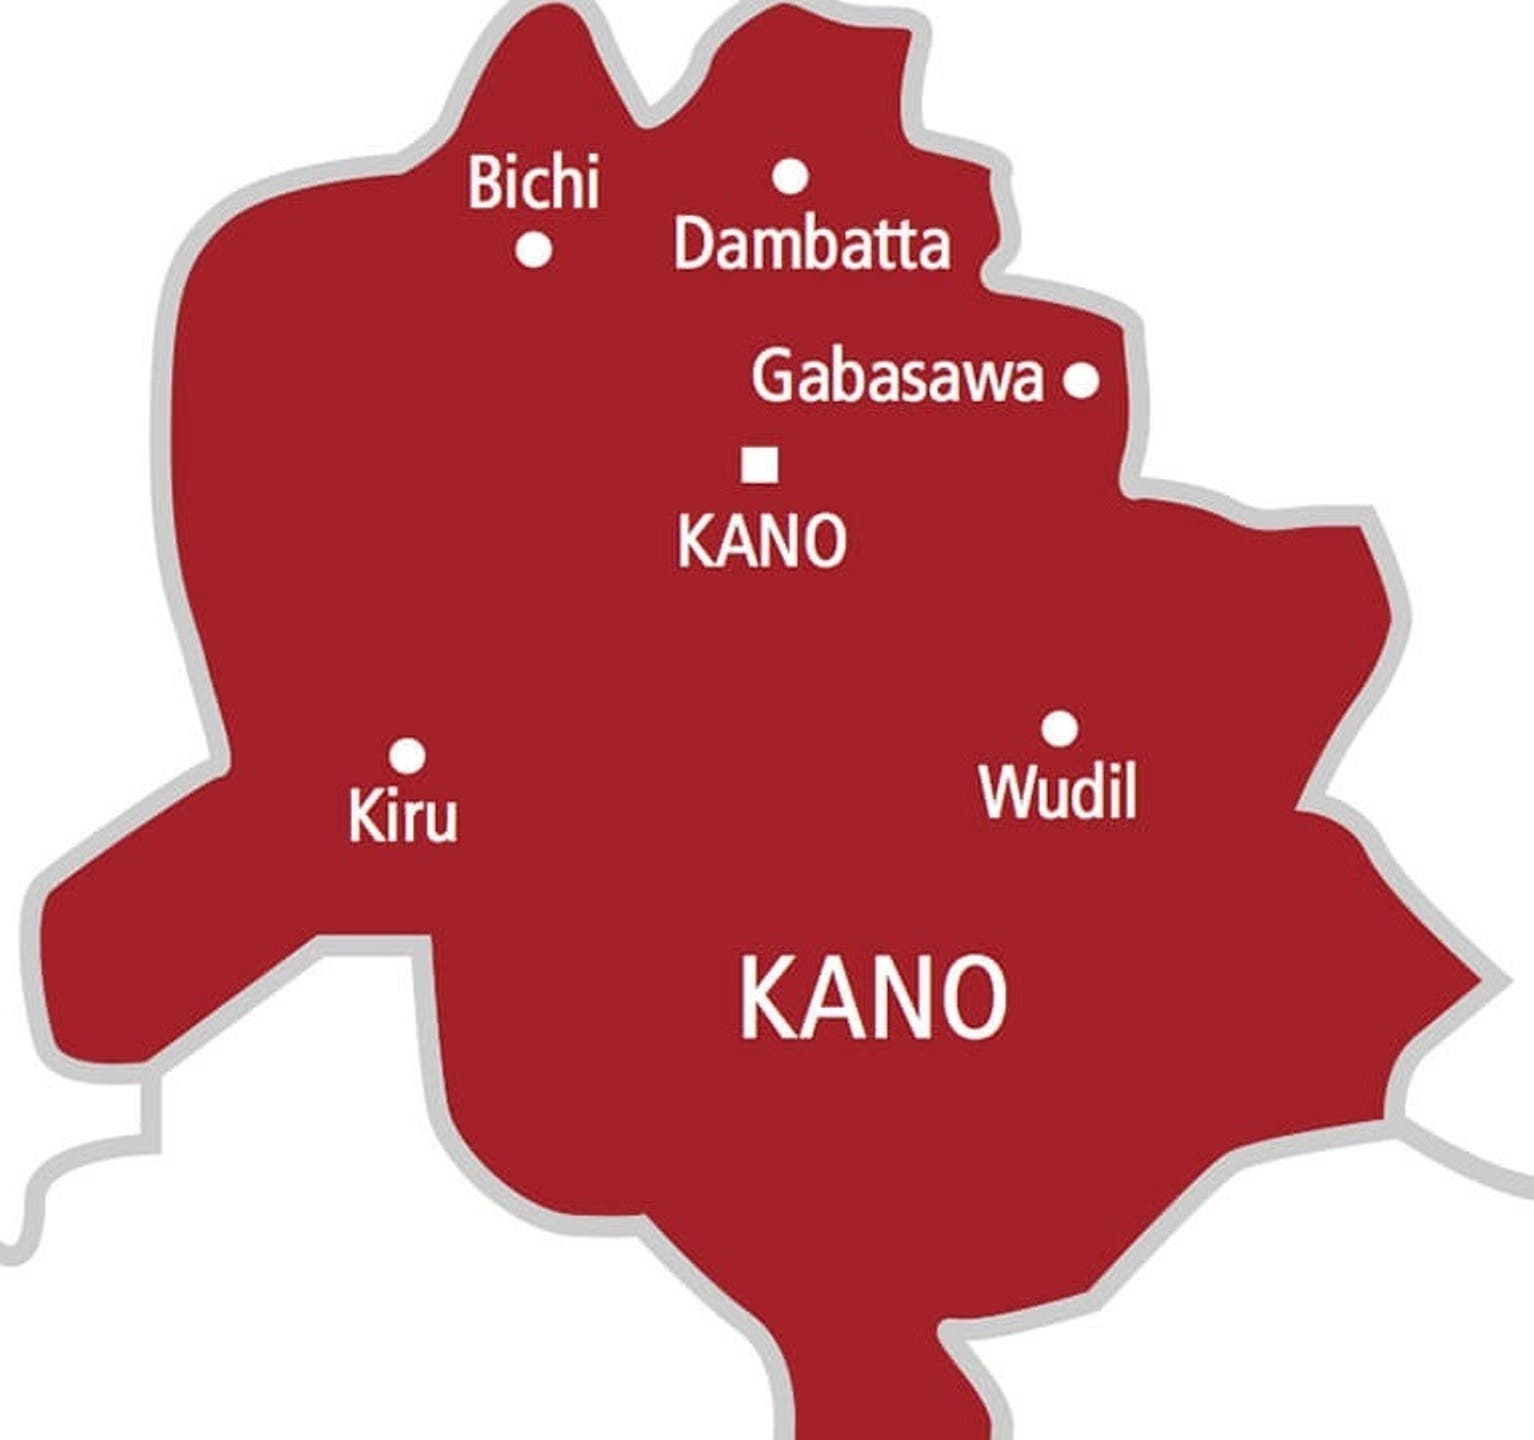 Kano: A newborn baby drowns in the well